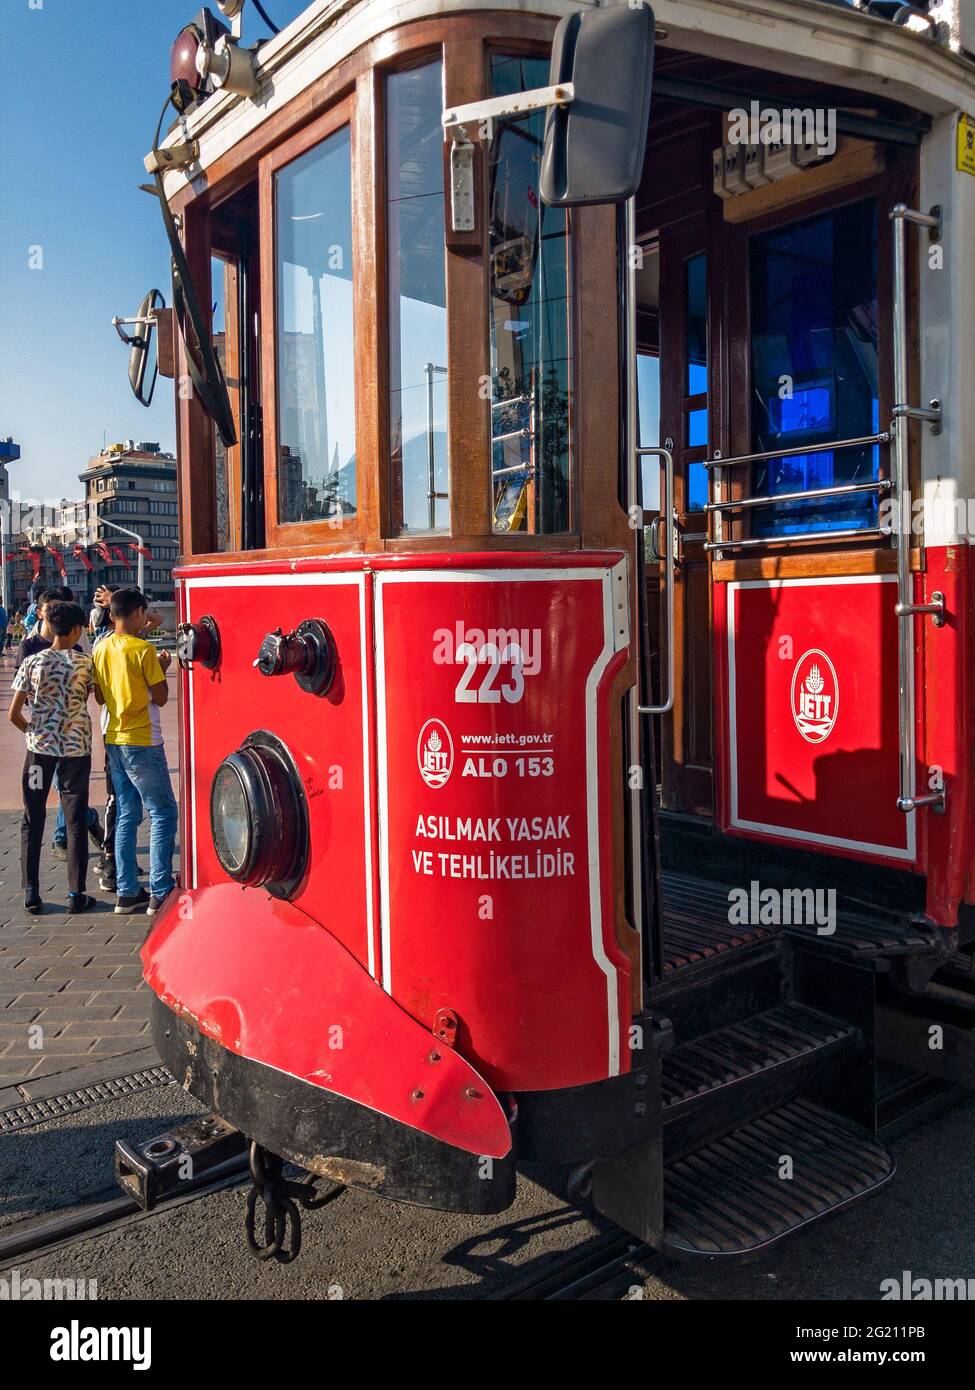 Typical historical tram on Istikal street, the red tram departs from Taksim Square in the heart of Istanbul, Turkey. 06-22-2019 Stock Photo